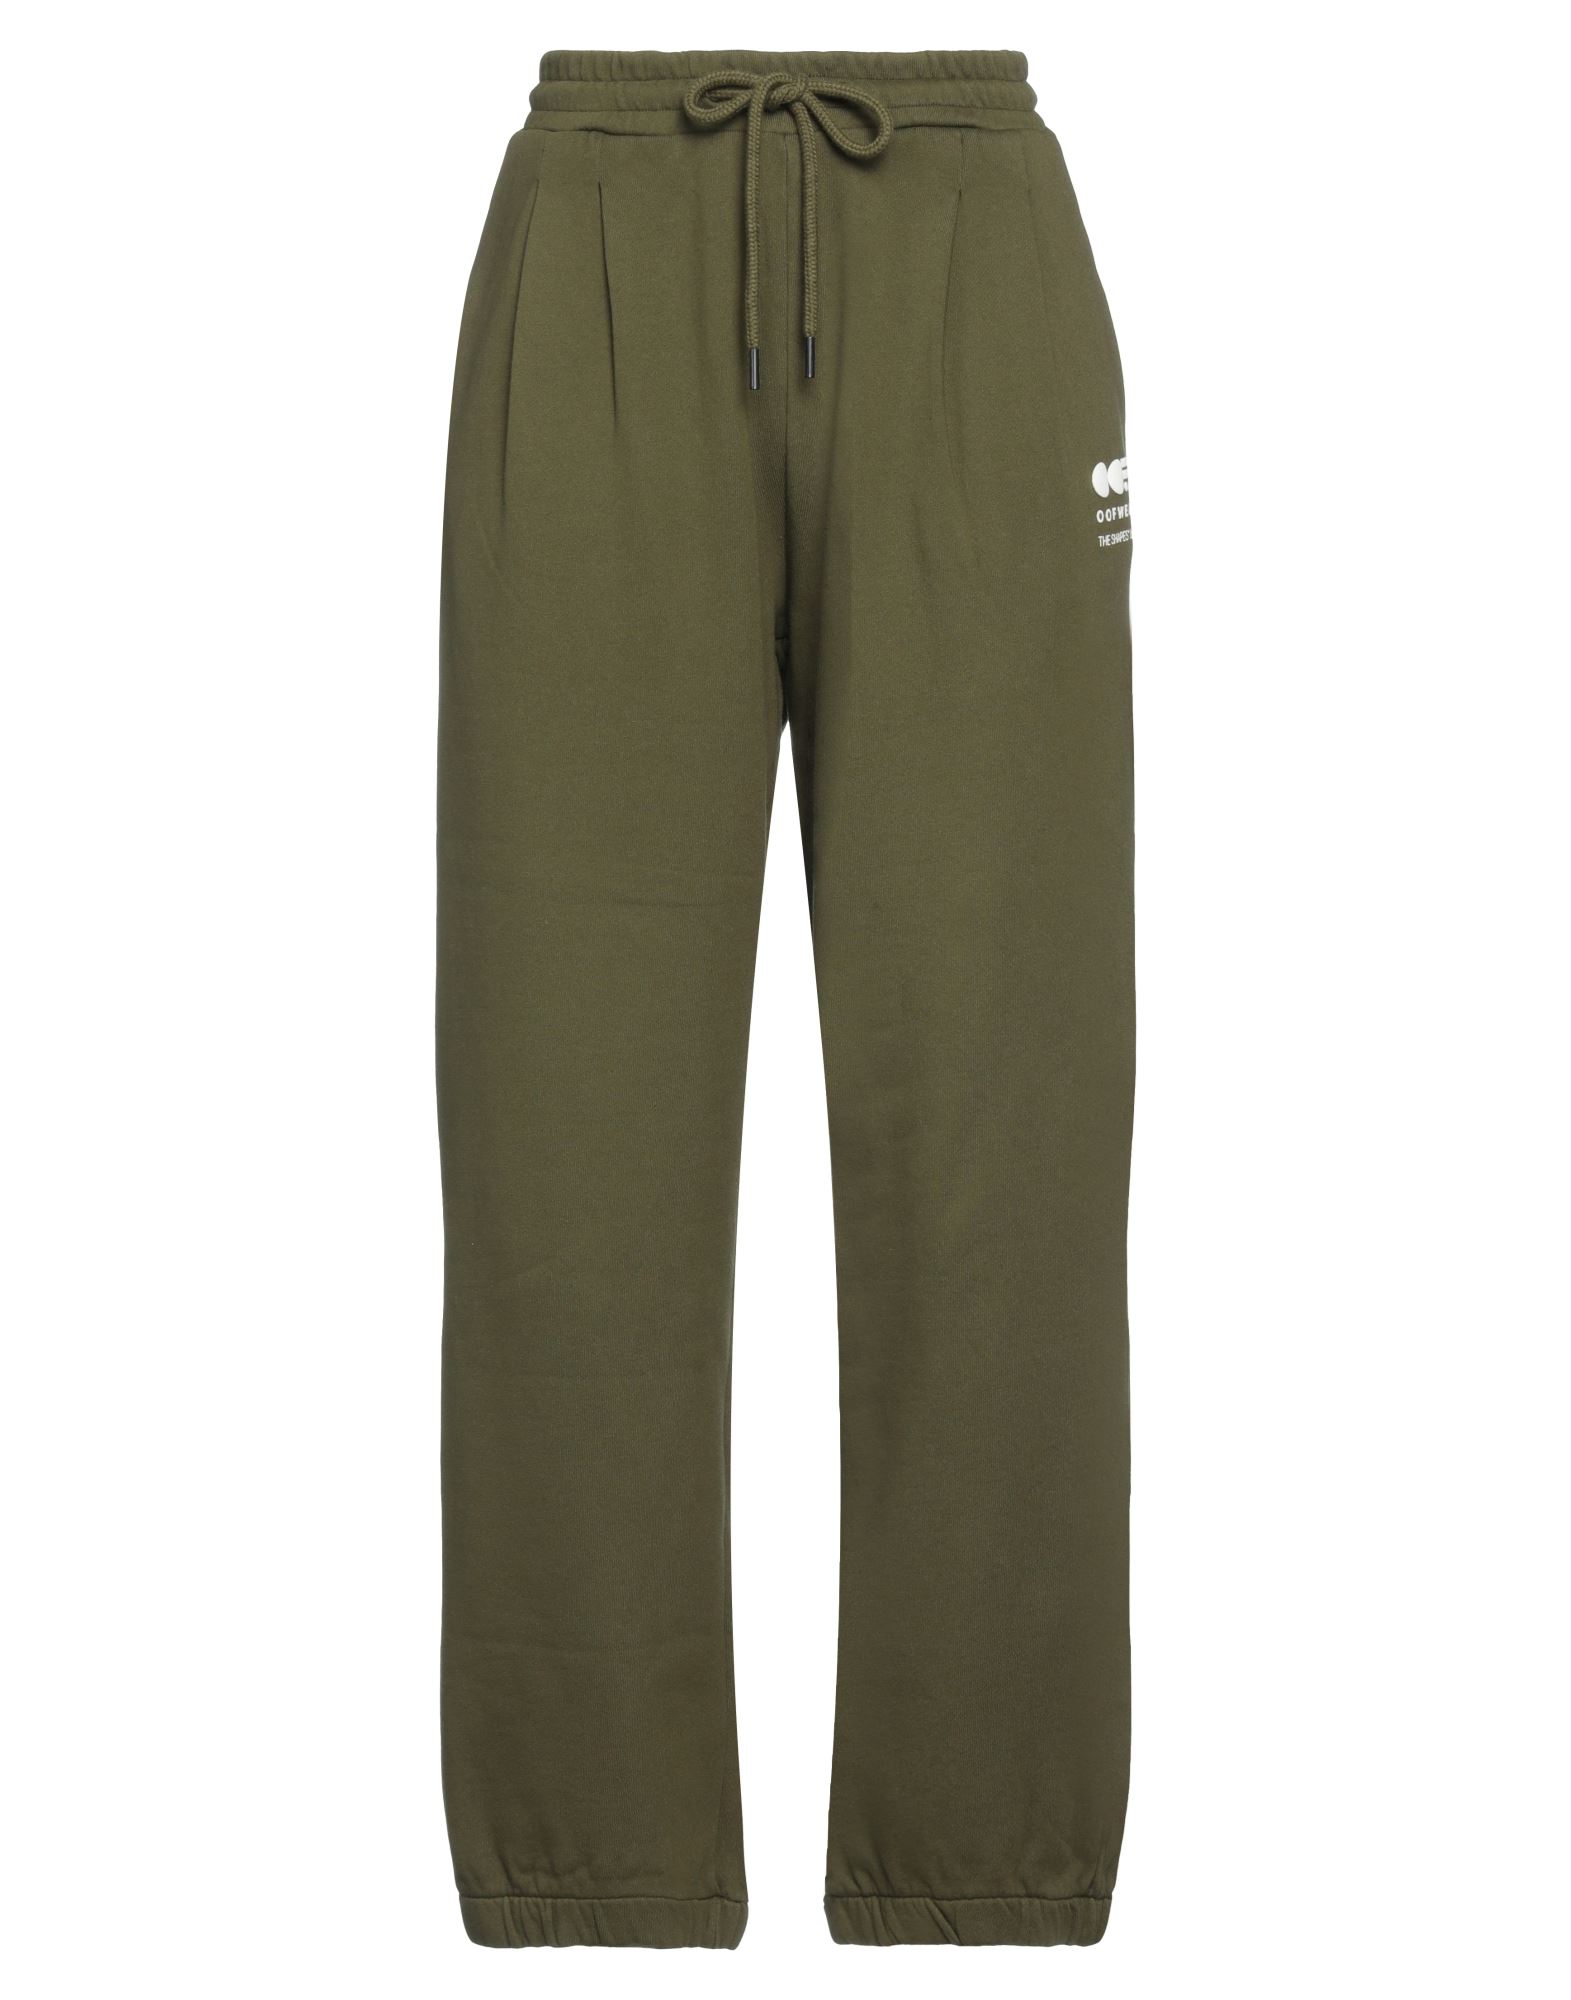 OOF OOF WOMAN PANTS MILITARY GREEN SIZE S COTTON